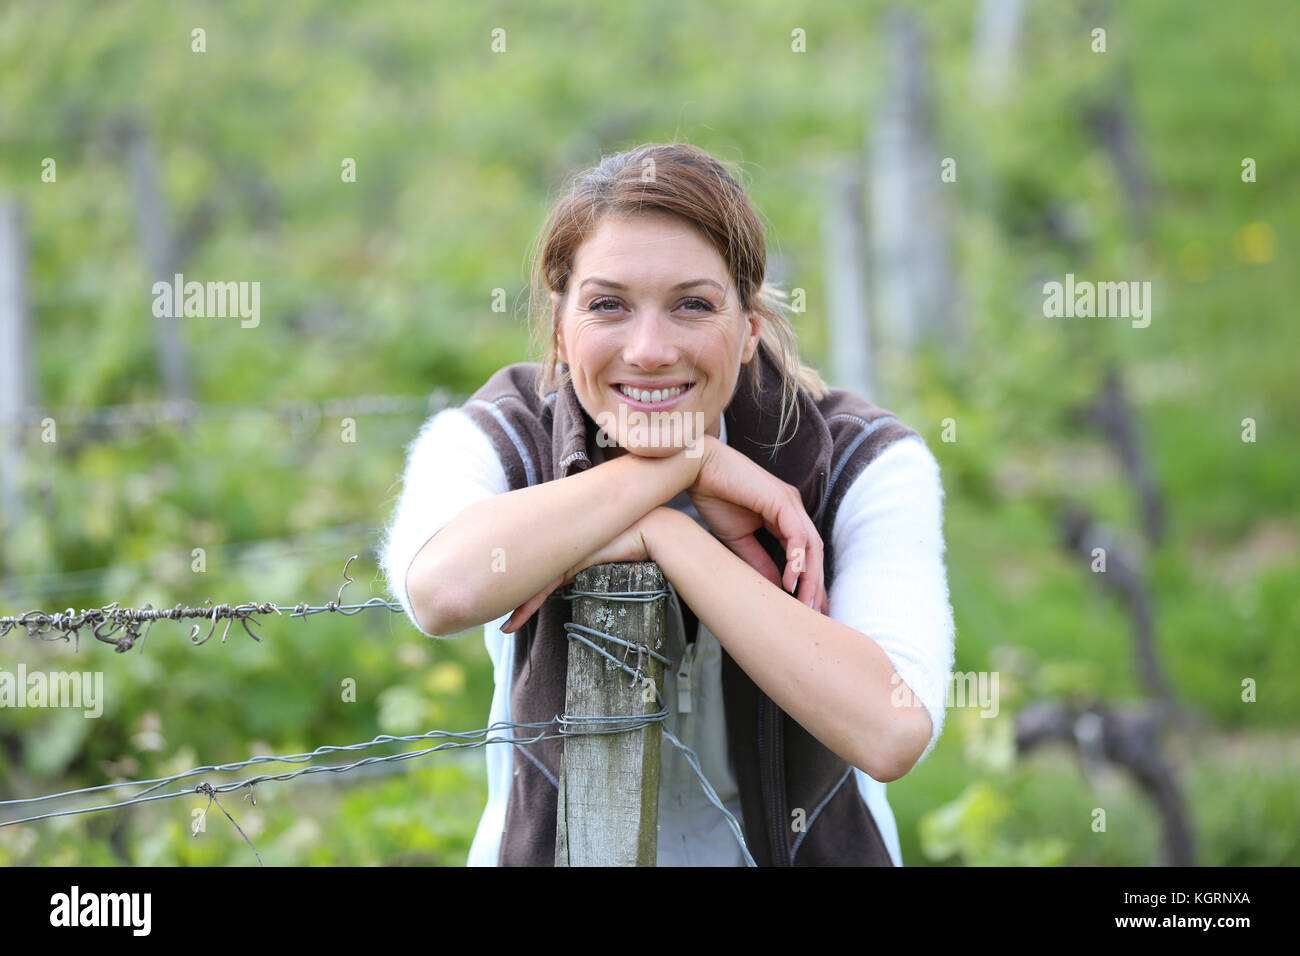 L'agriculture smiling woman standing in vineyard Banque D'Images